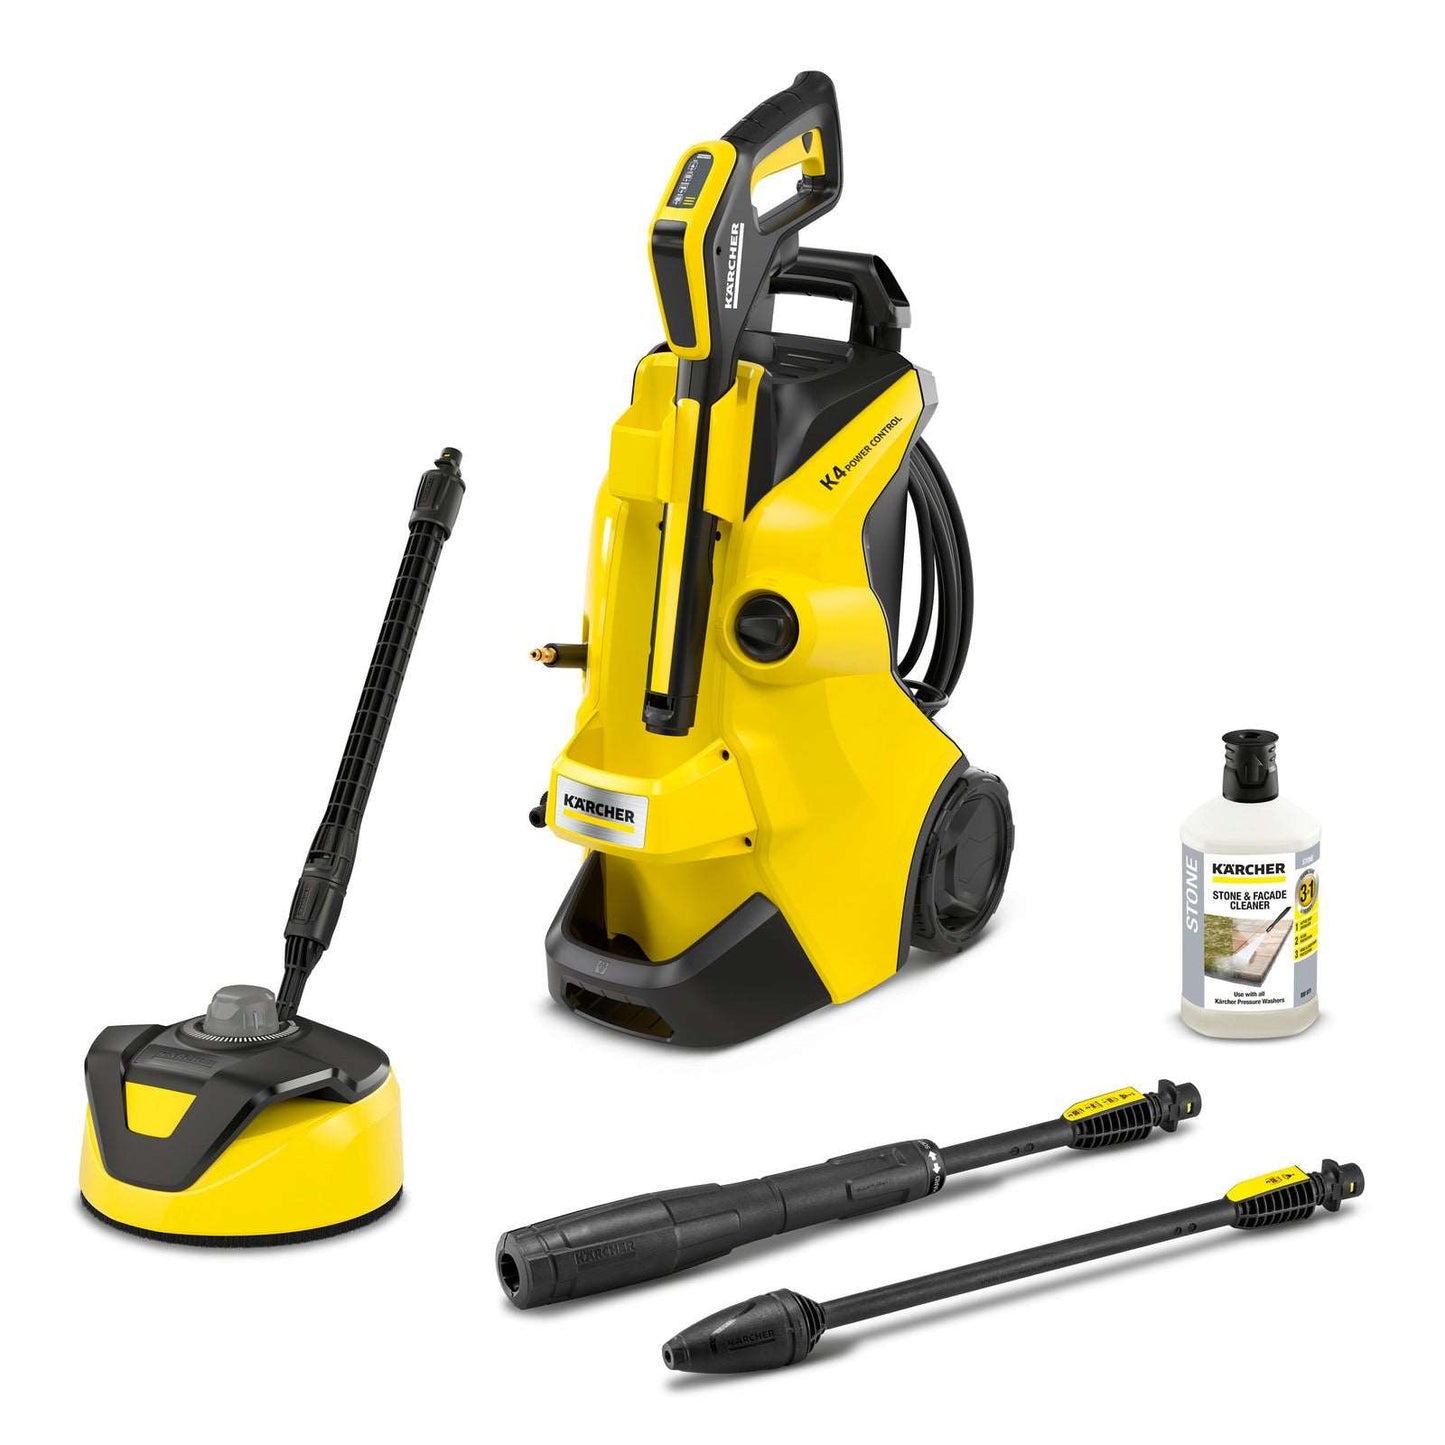 Karcher K4 Power Control Home 1800W Pressure Washer with Patio Cleaner Tool & Detergent - Fairspot UK